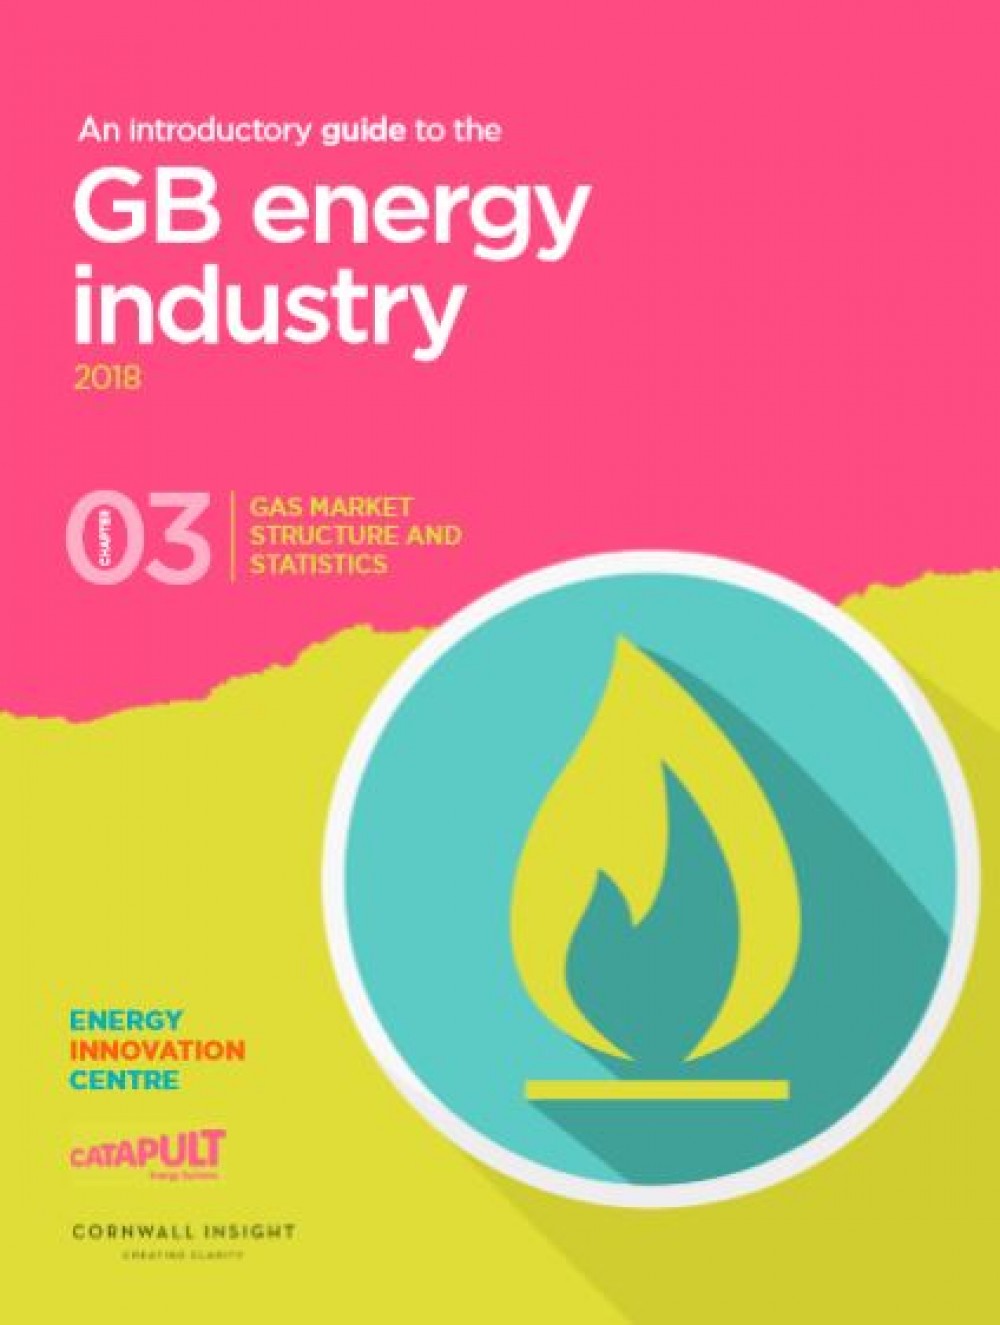 An introductory guide to the GB energy industry: Gas market structure and statistics